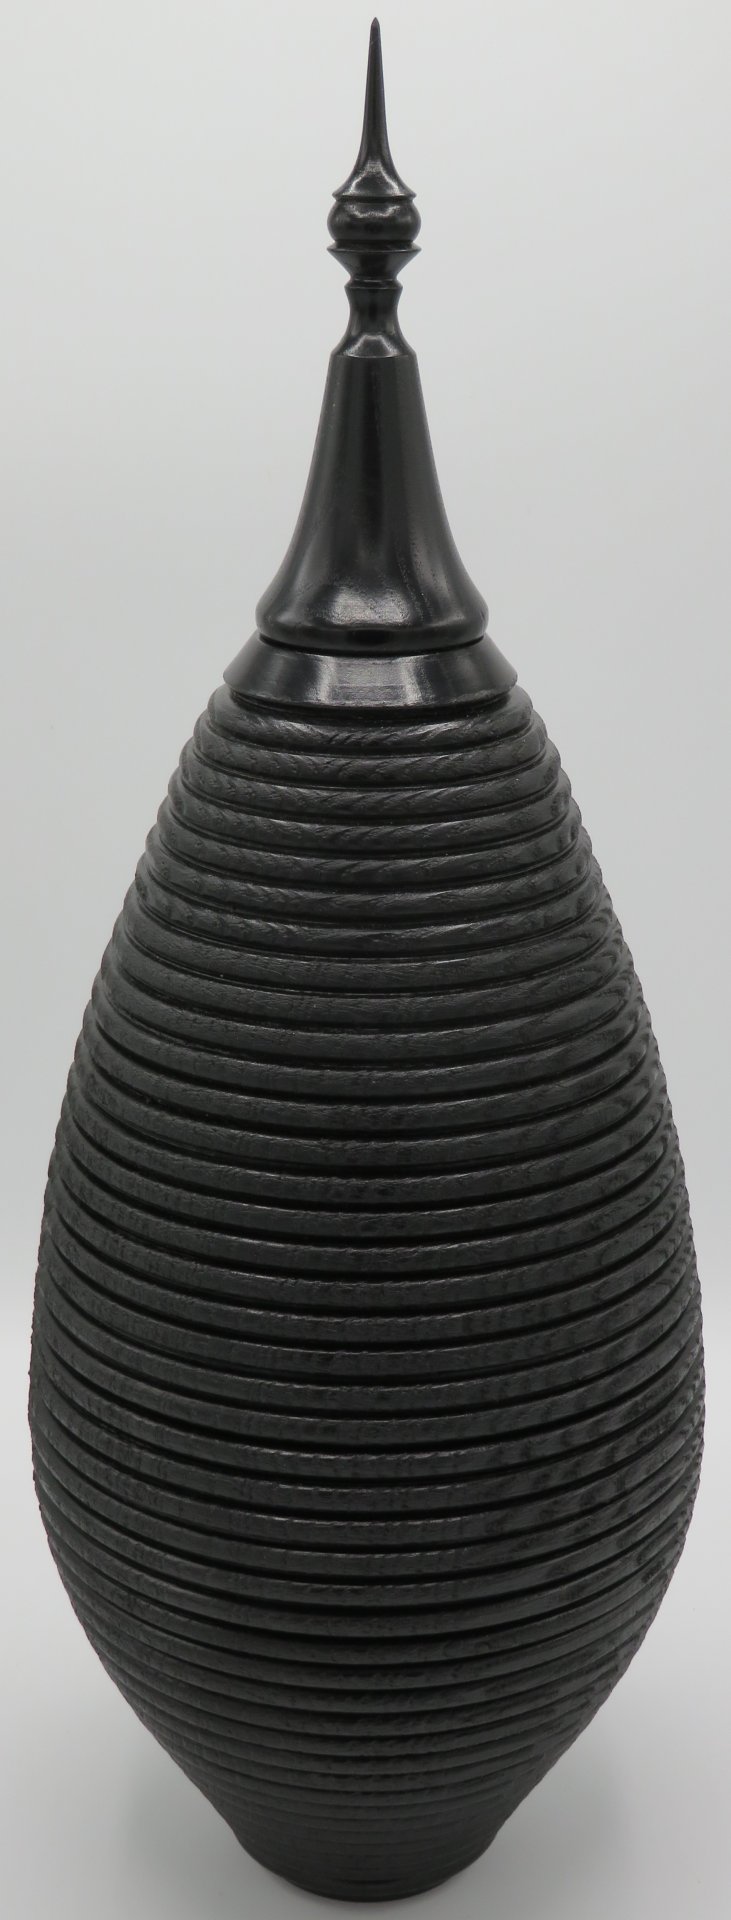 Ebonised ,beaded and texturned tall hollow form.